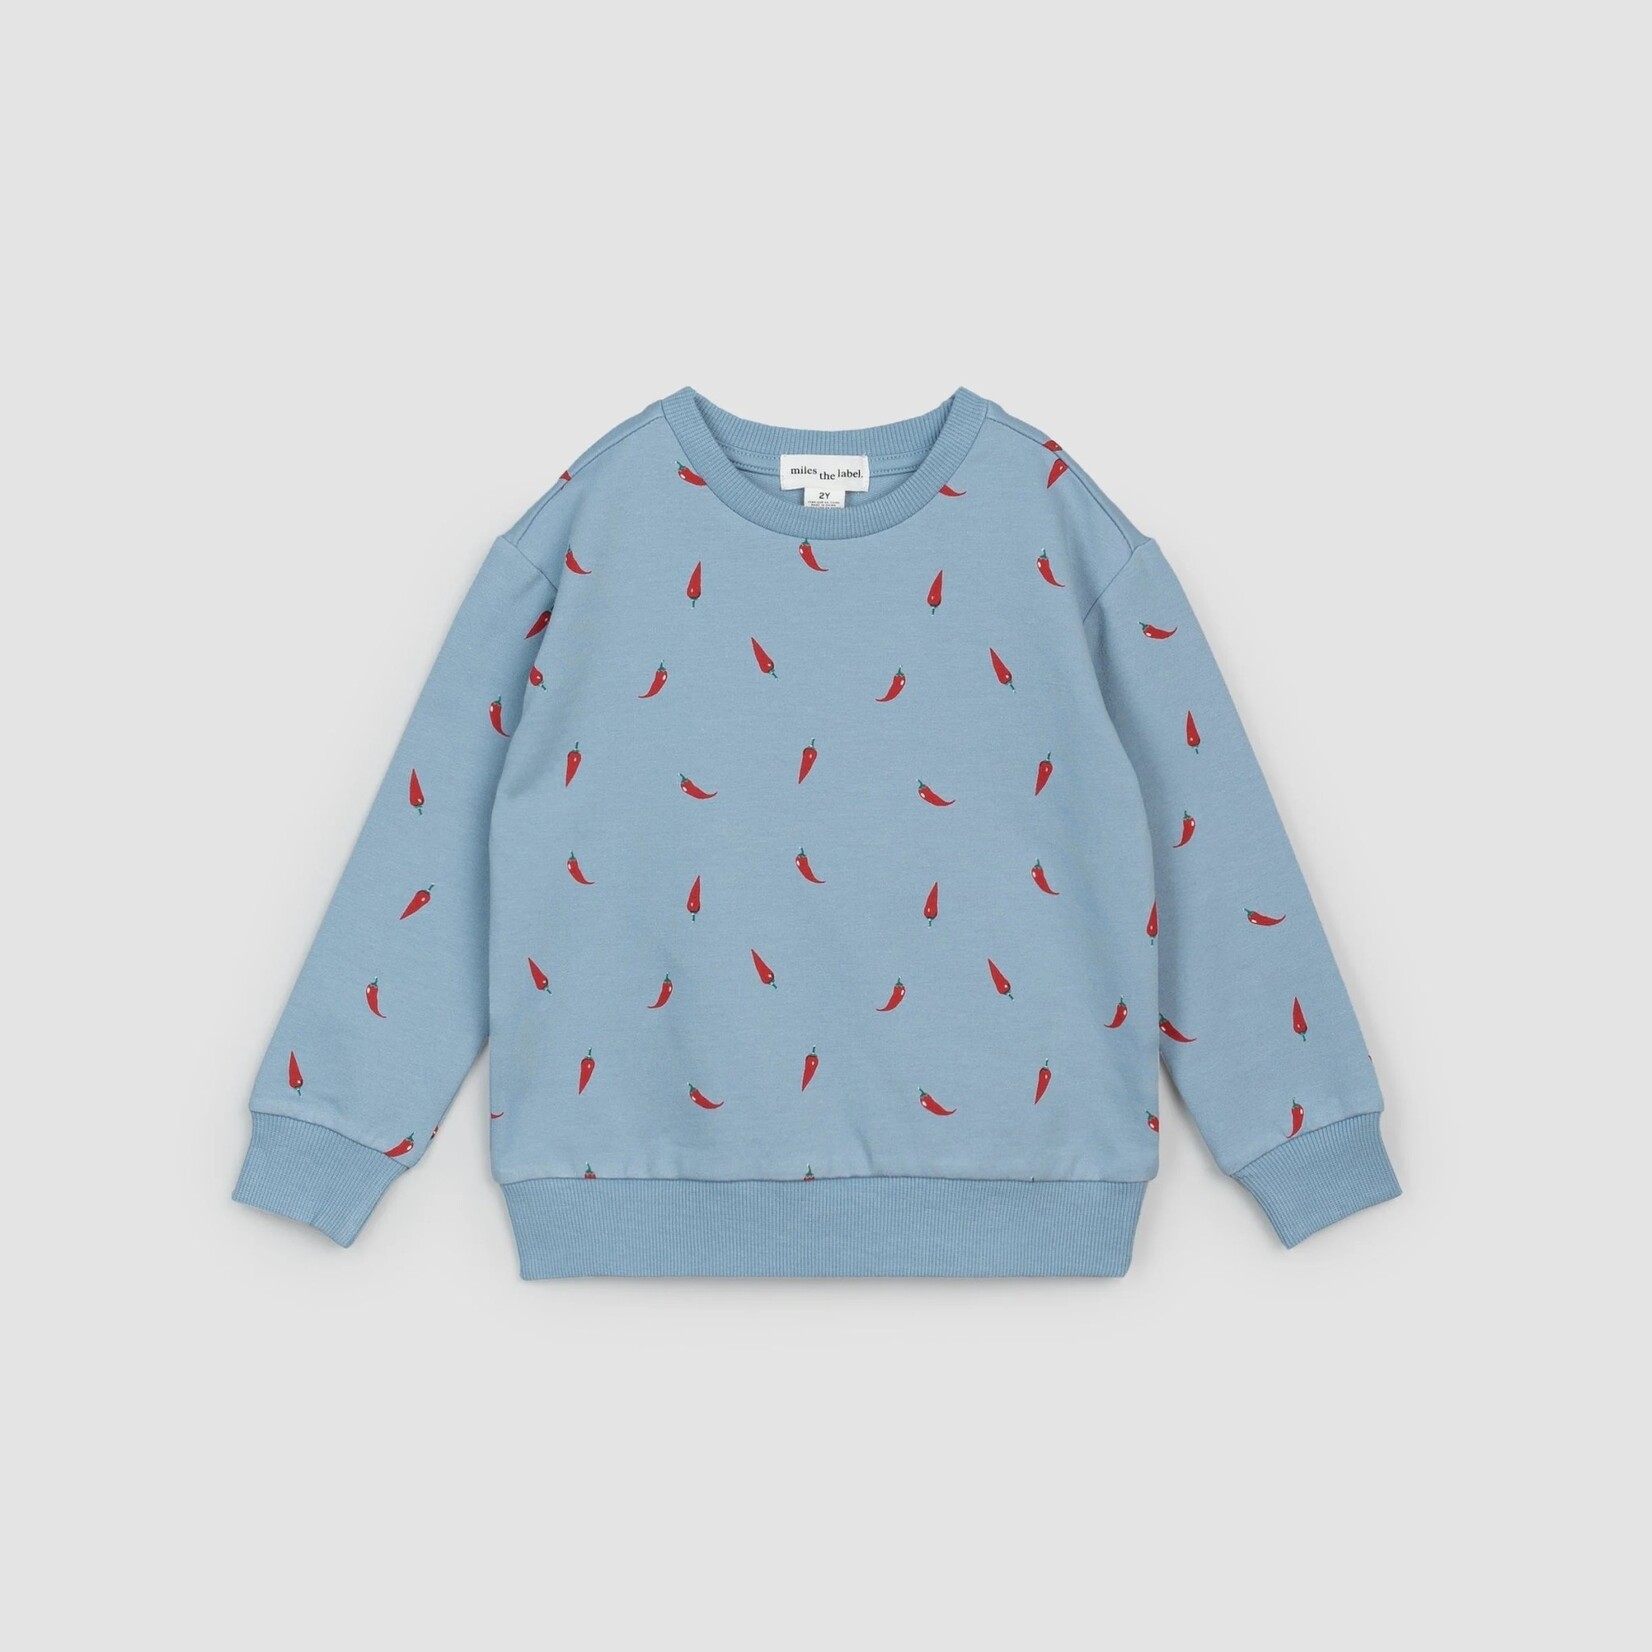 Miles the label MILES THE LABEL - Longsleeve light blue sweater with allover red pepper print